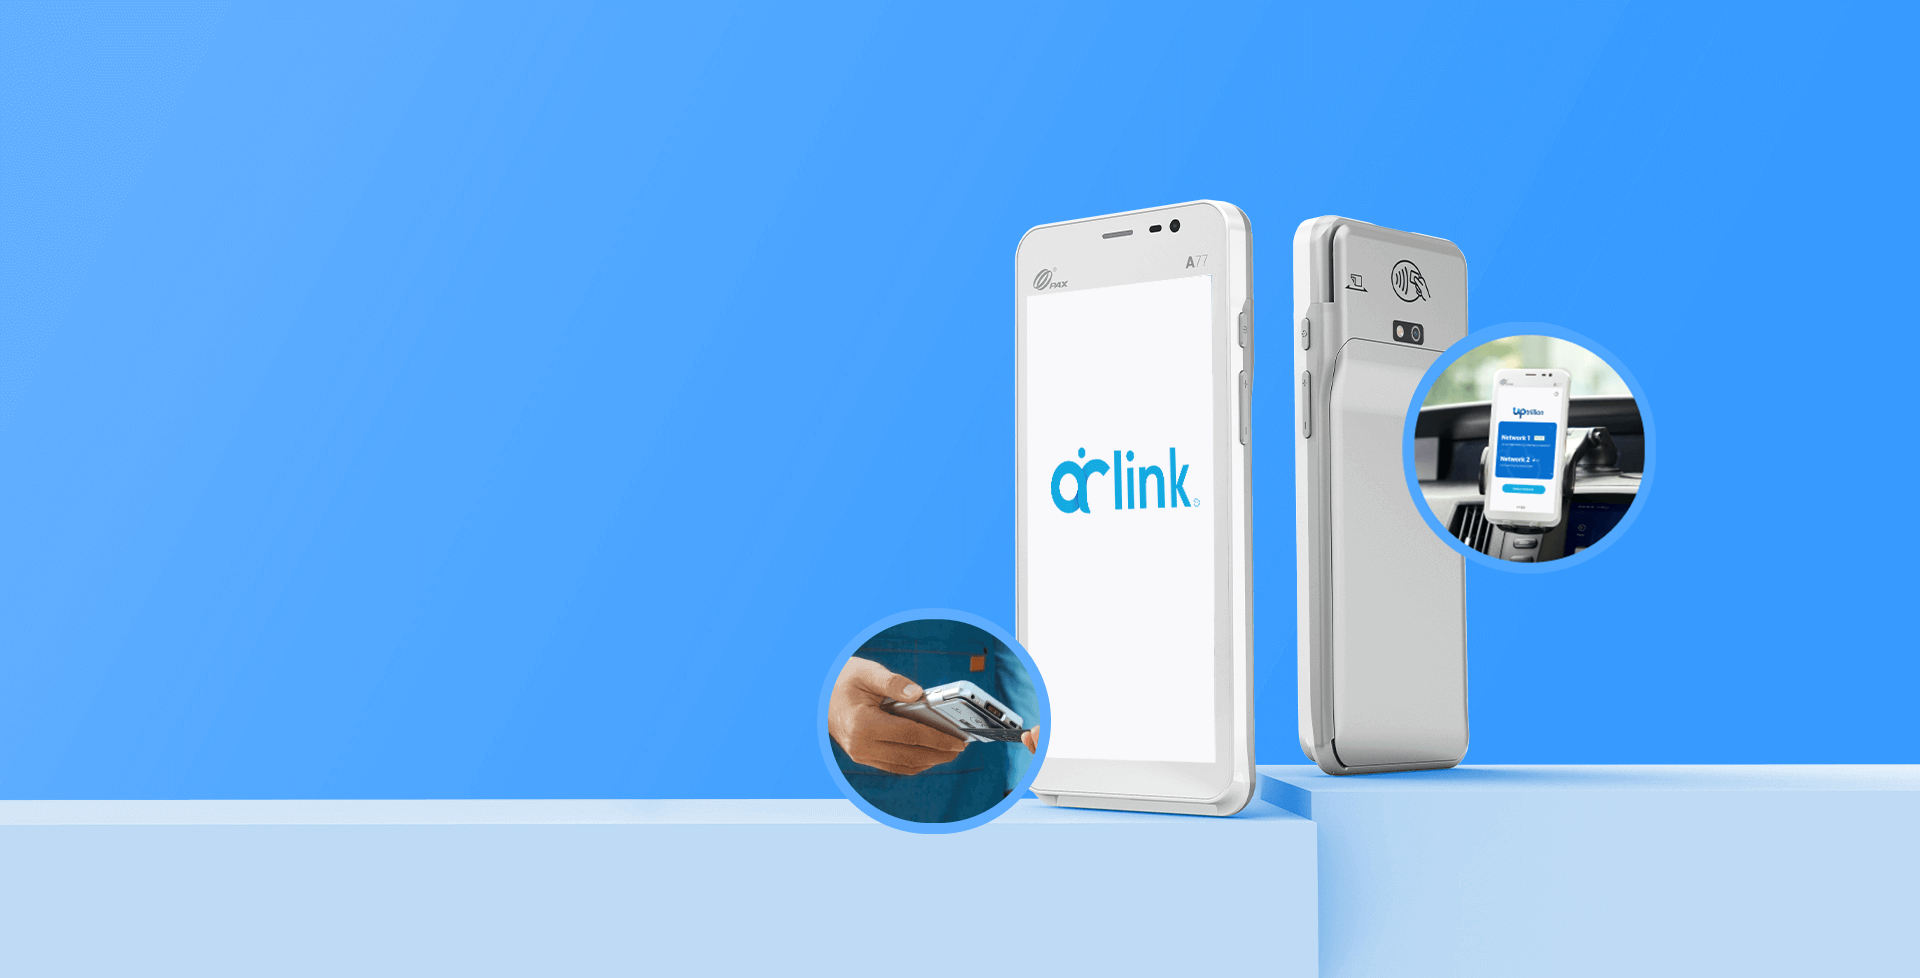 A77,front and back, mobile payment device displaying 'airlink' on screen. Overall background is blue. Showing off use cases in small circles